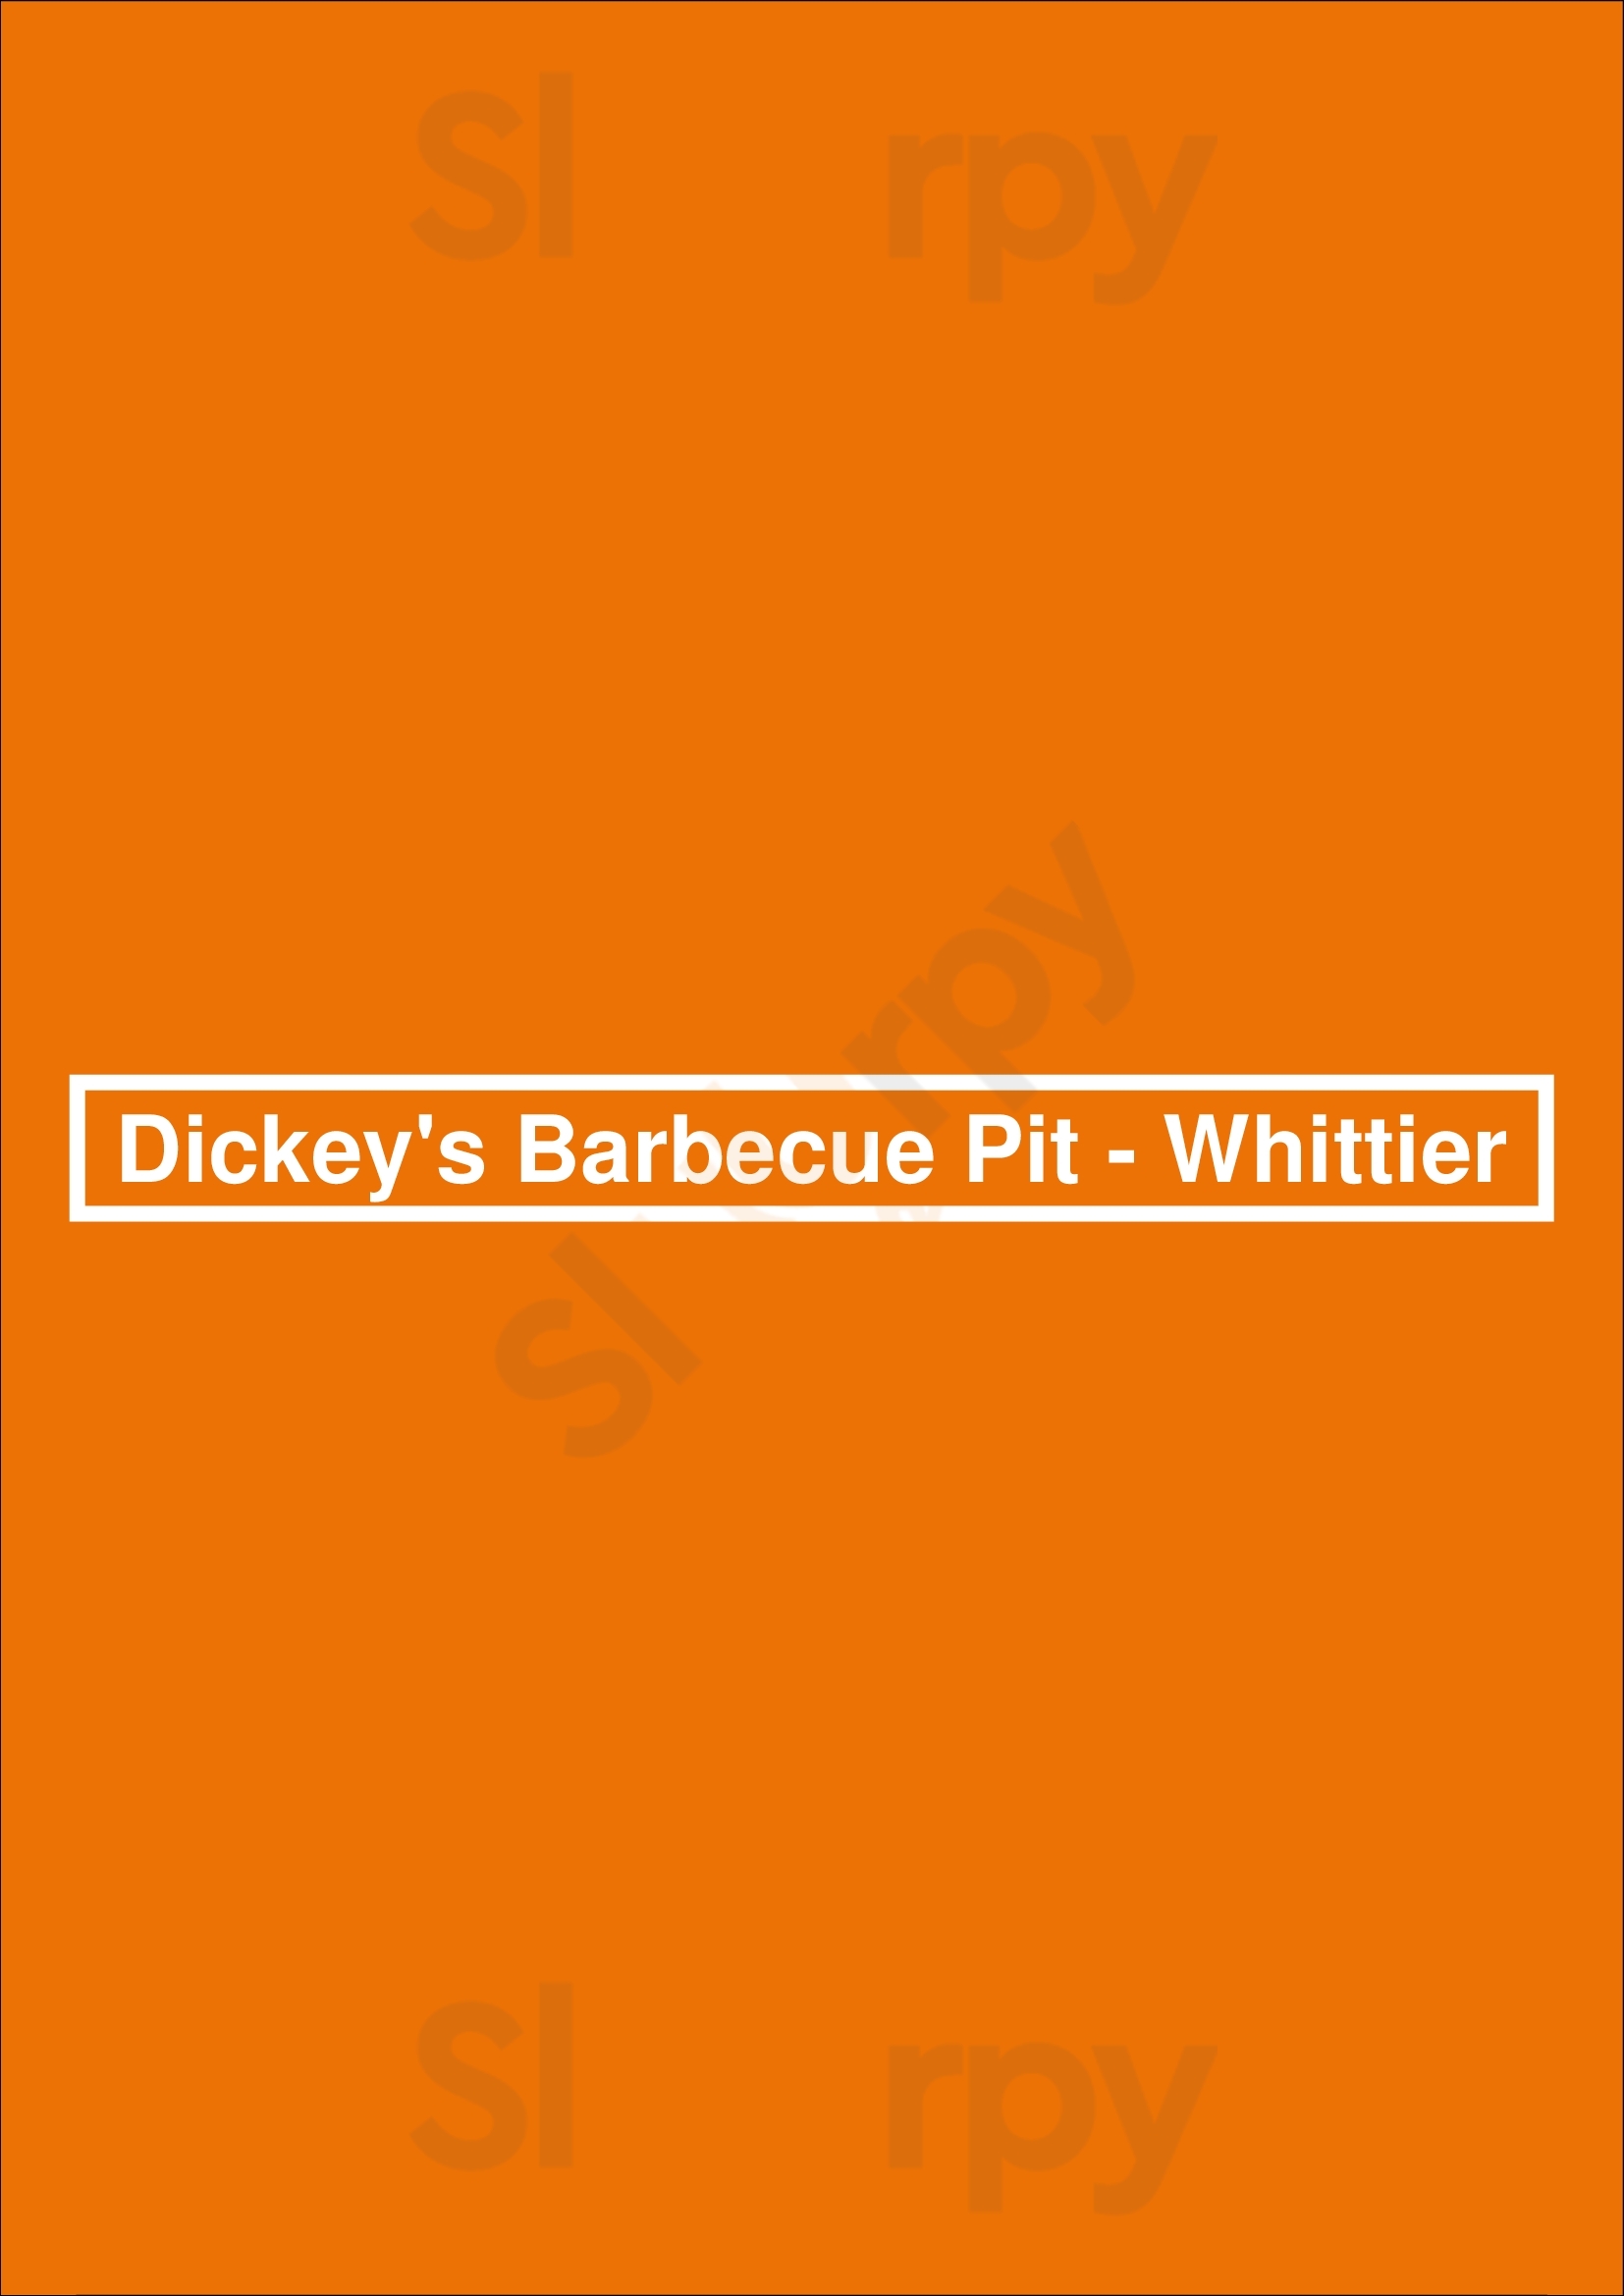 Dickey's Barbecue Pit - Whittier Whittier Menu - 1